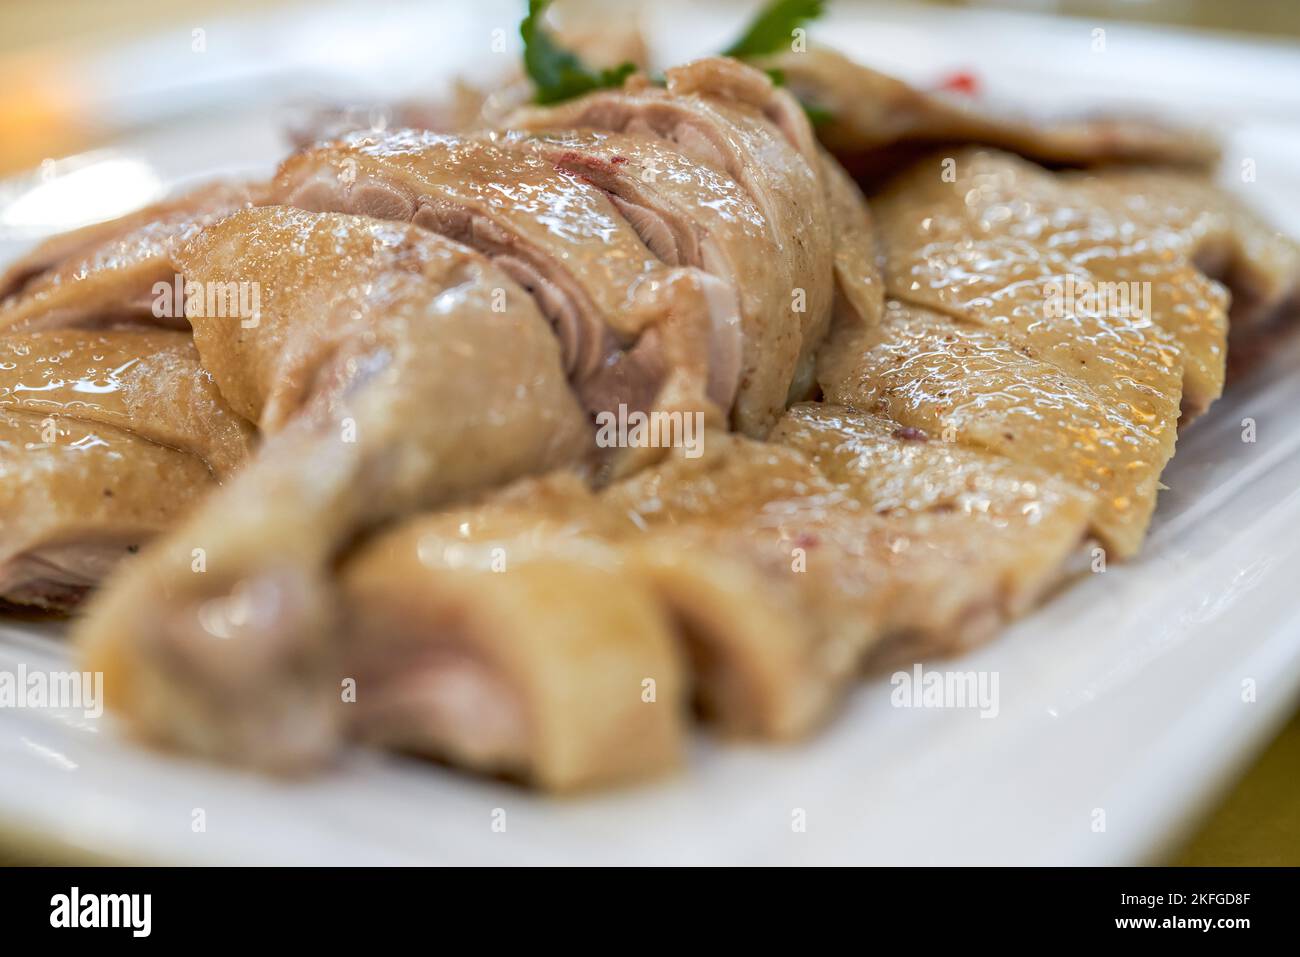 A delicious Chinese dish, boiled duck Stock Photo